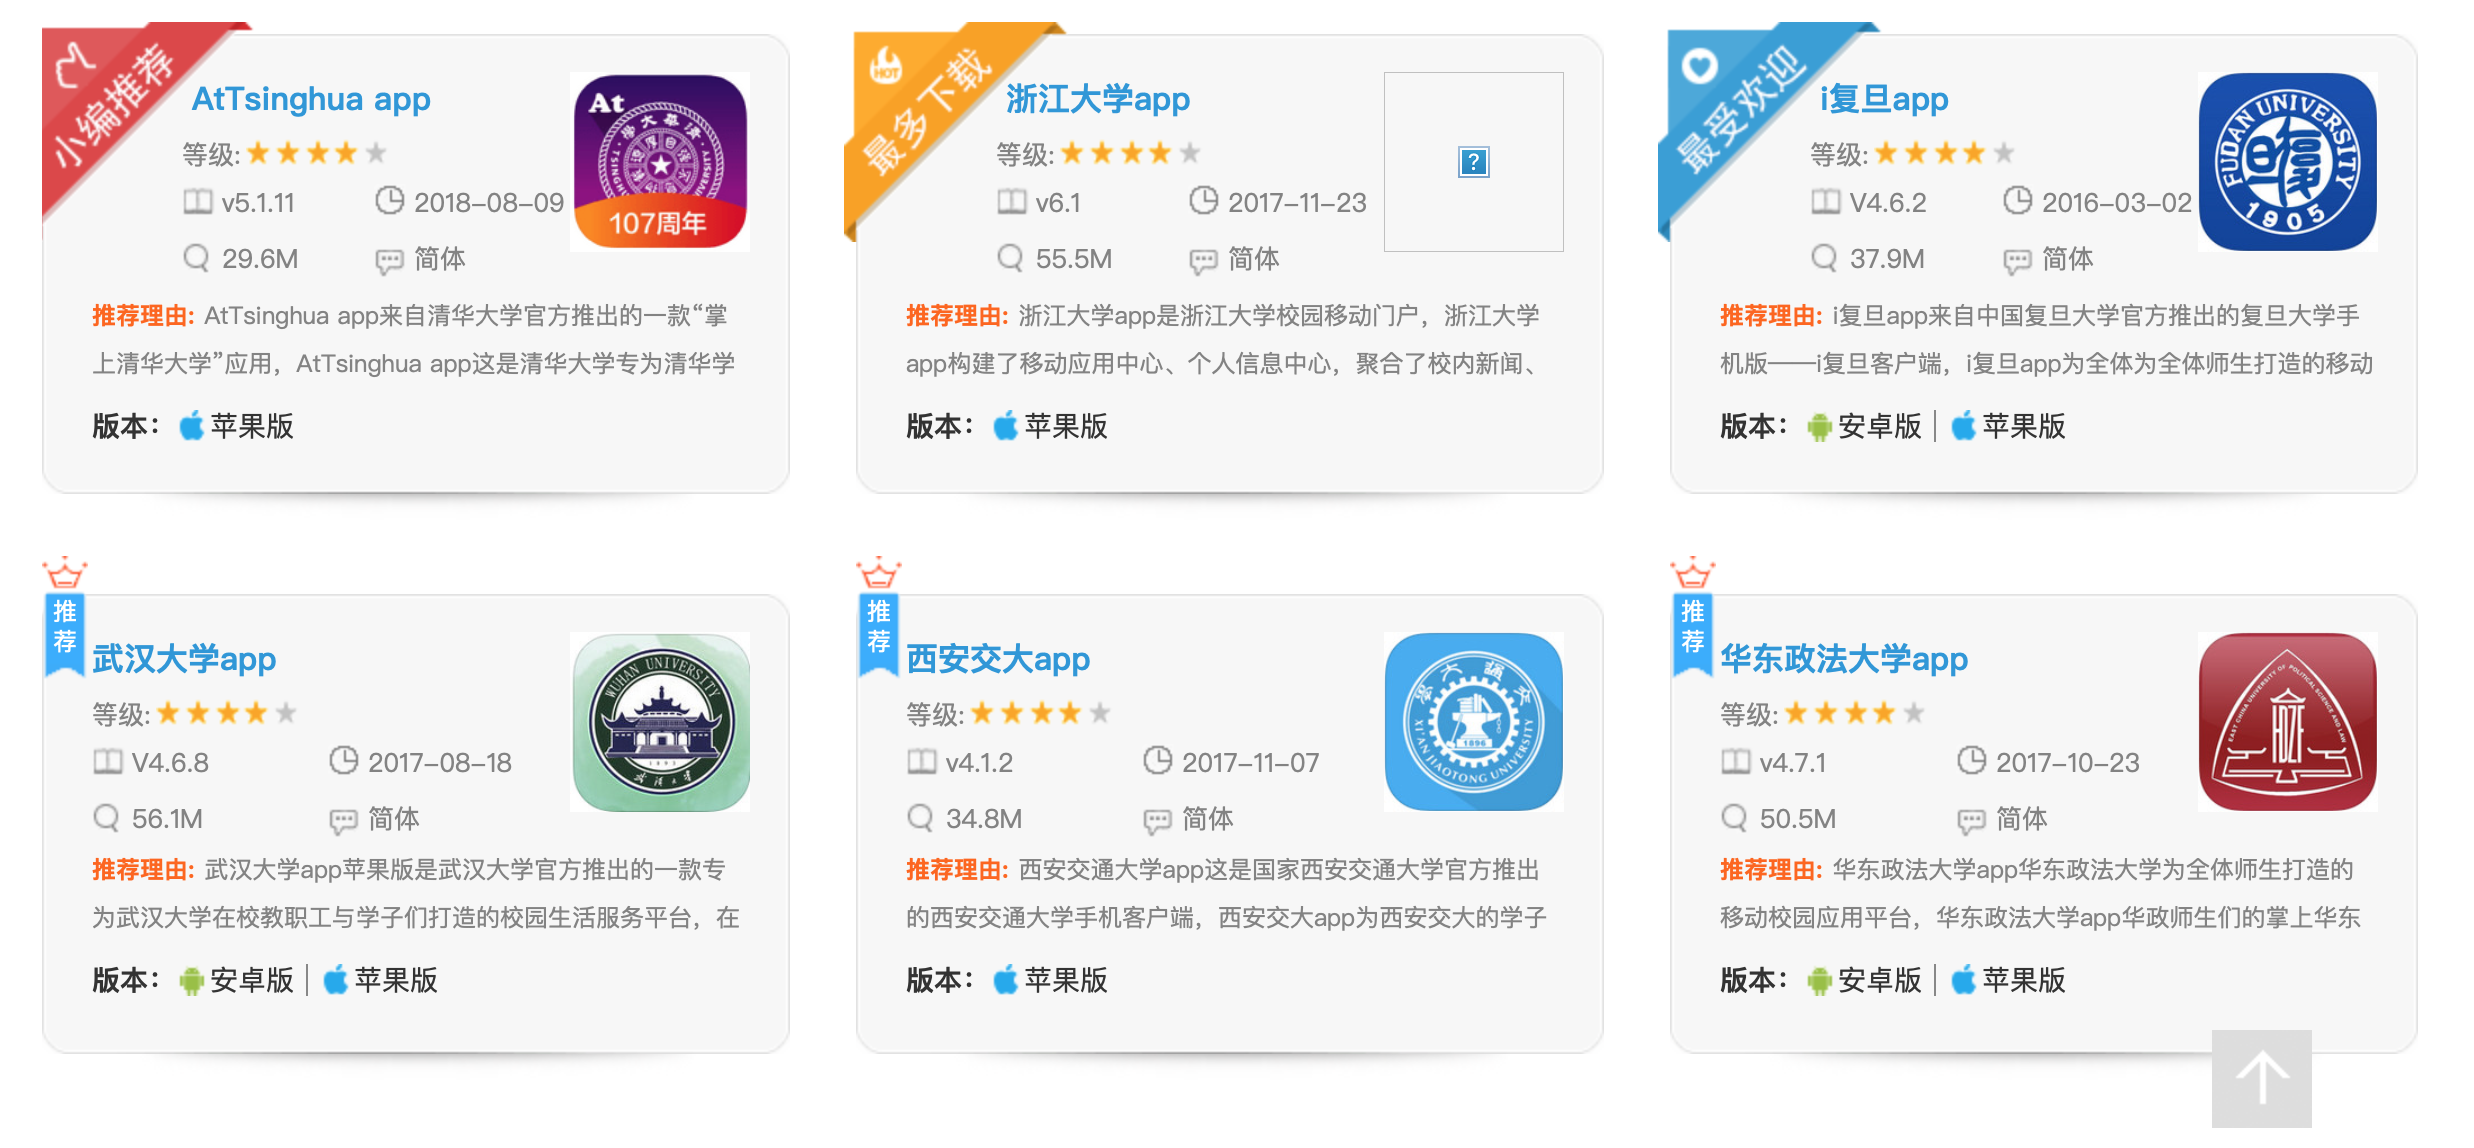 The Chinese education ministry wants to clamp down on the proliferation of campus apps